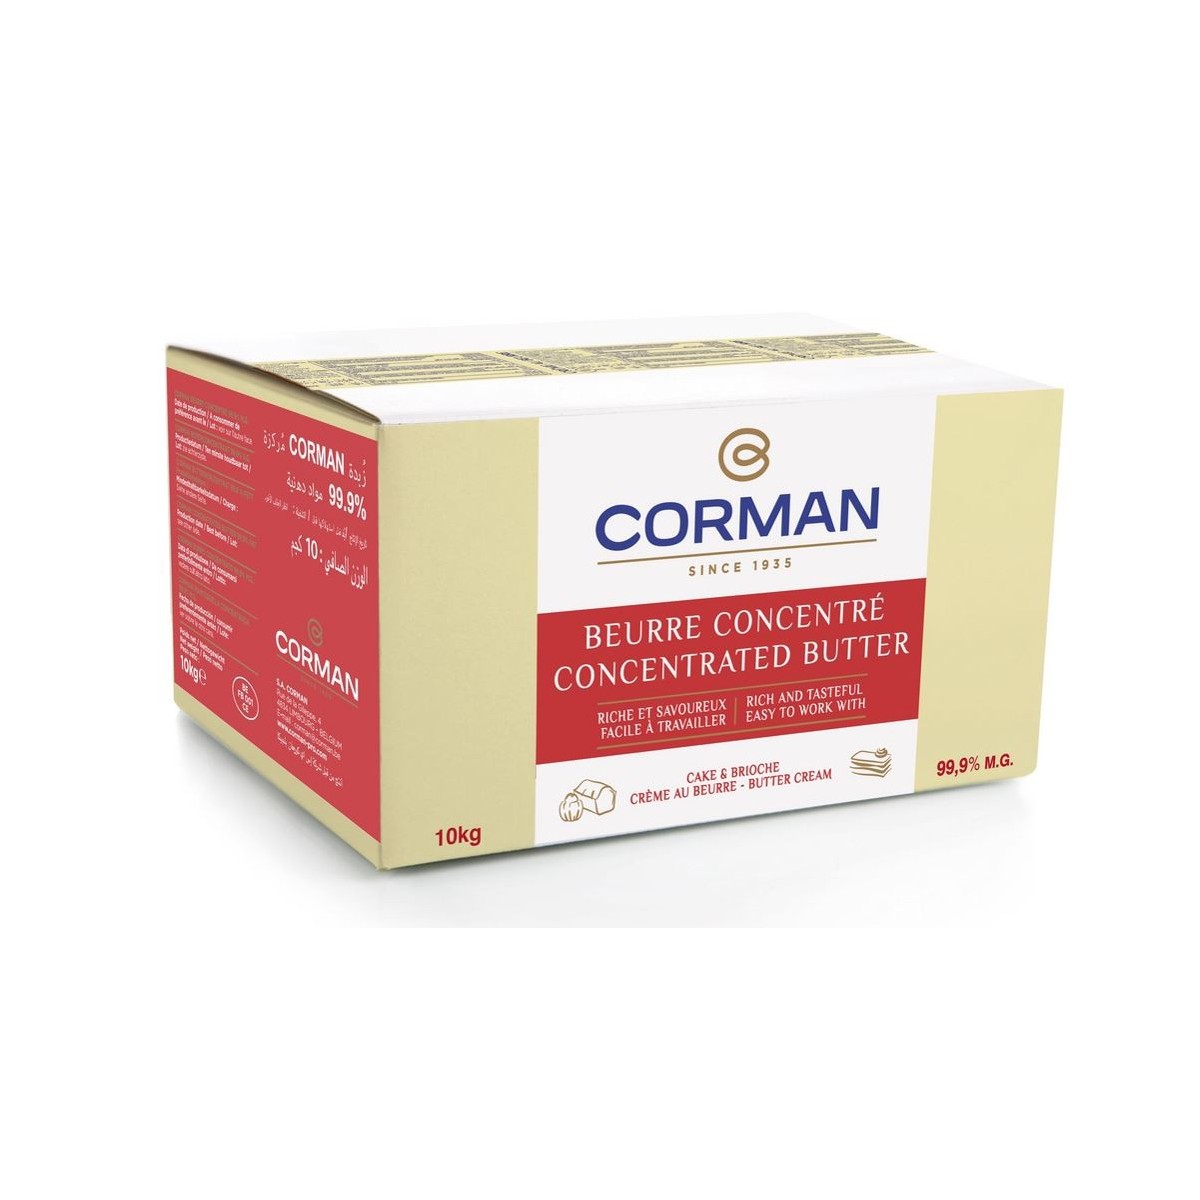 CORMAN BUTTER CONCENTRATED CREAM WITH BUTTER BLOCK 10KG 0029120 / 26851501  KG